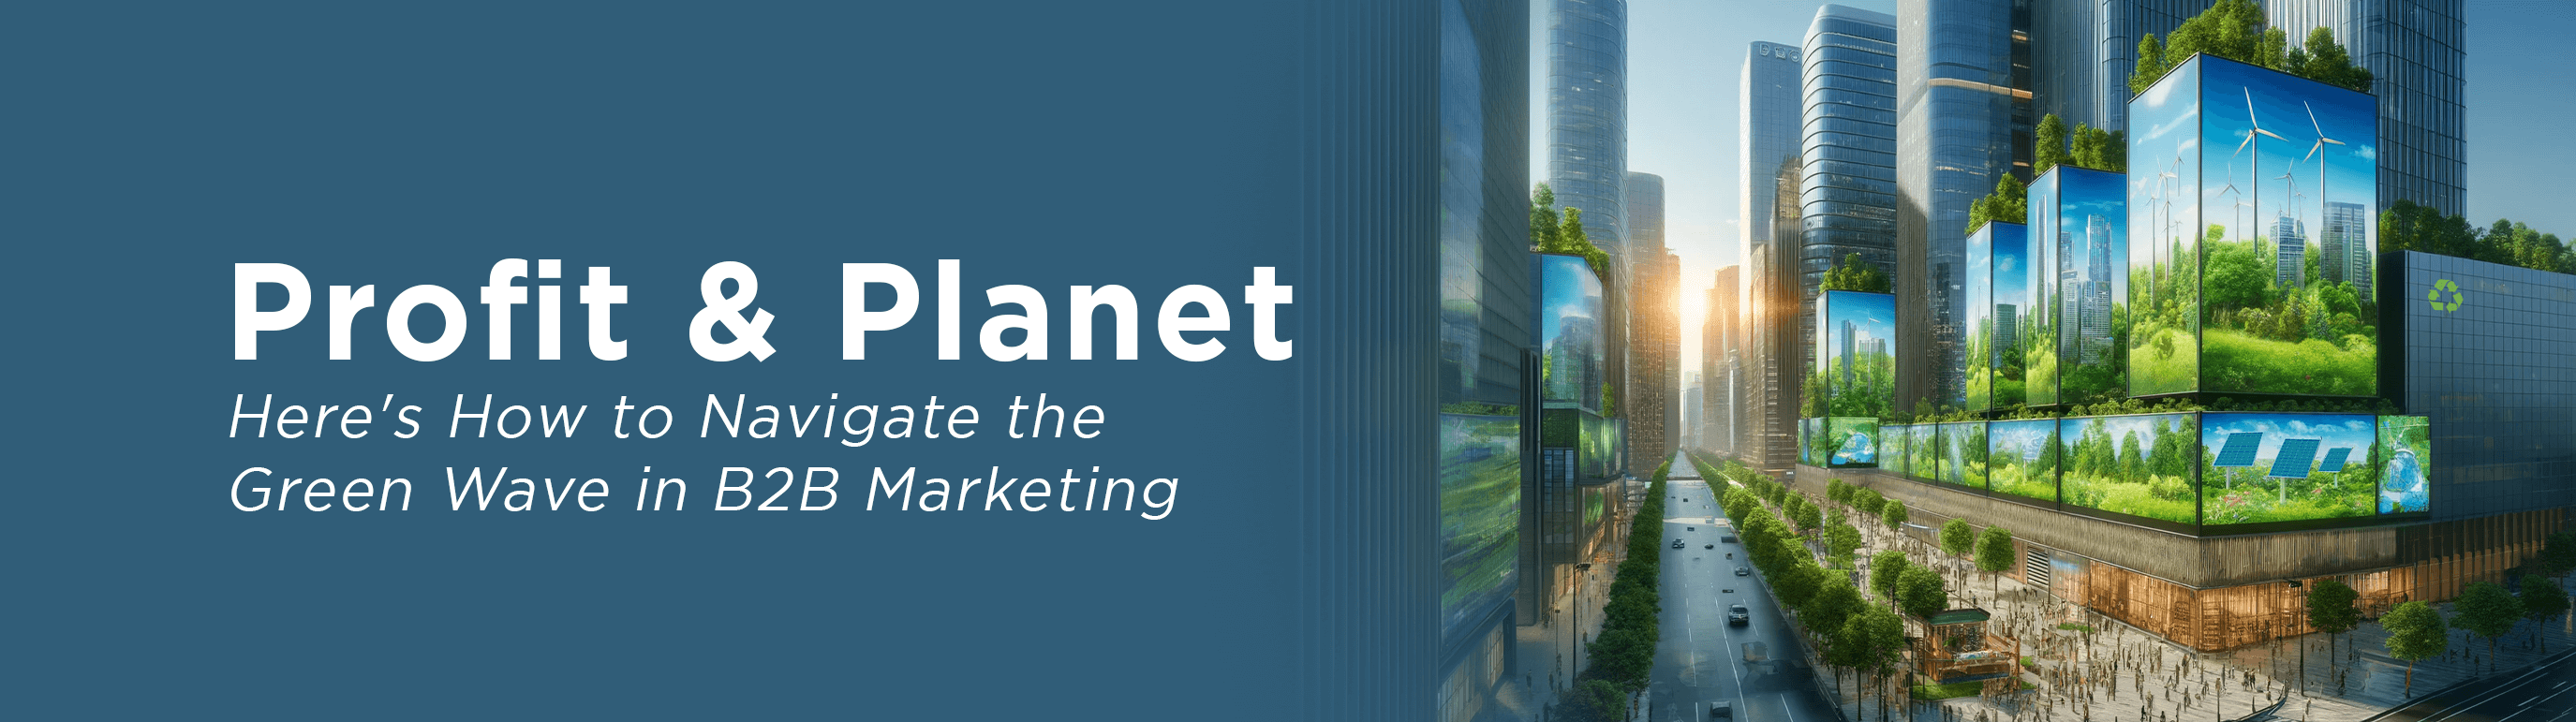 Profit & Planet: Here’s How to Navigate the Green Wave in B2B Marketing